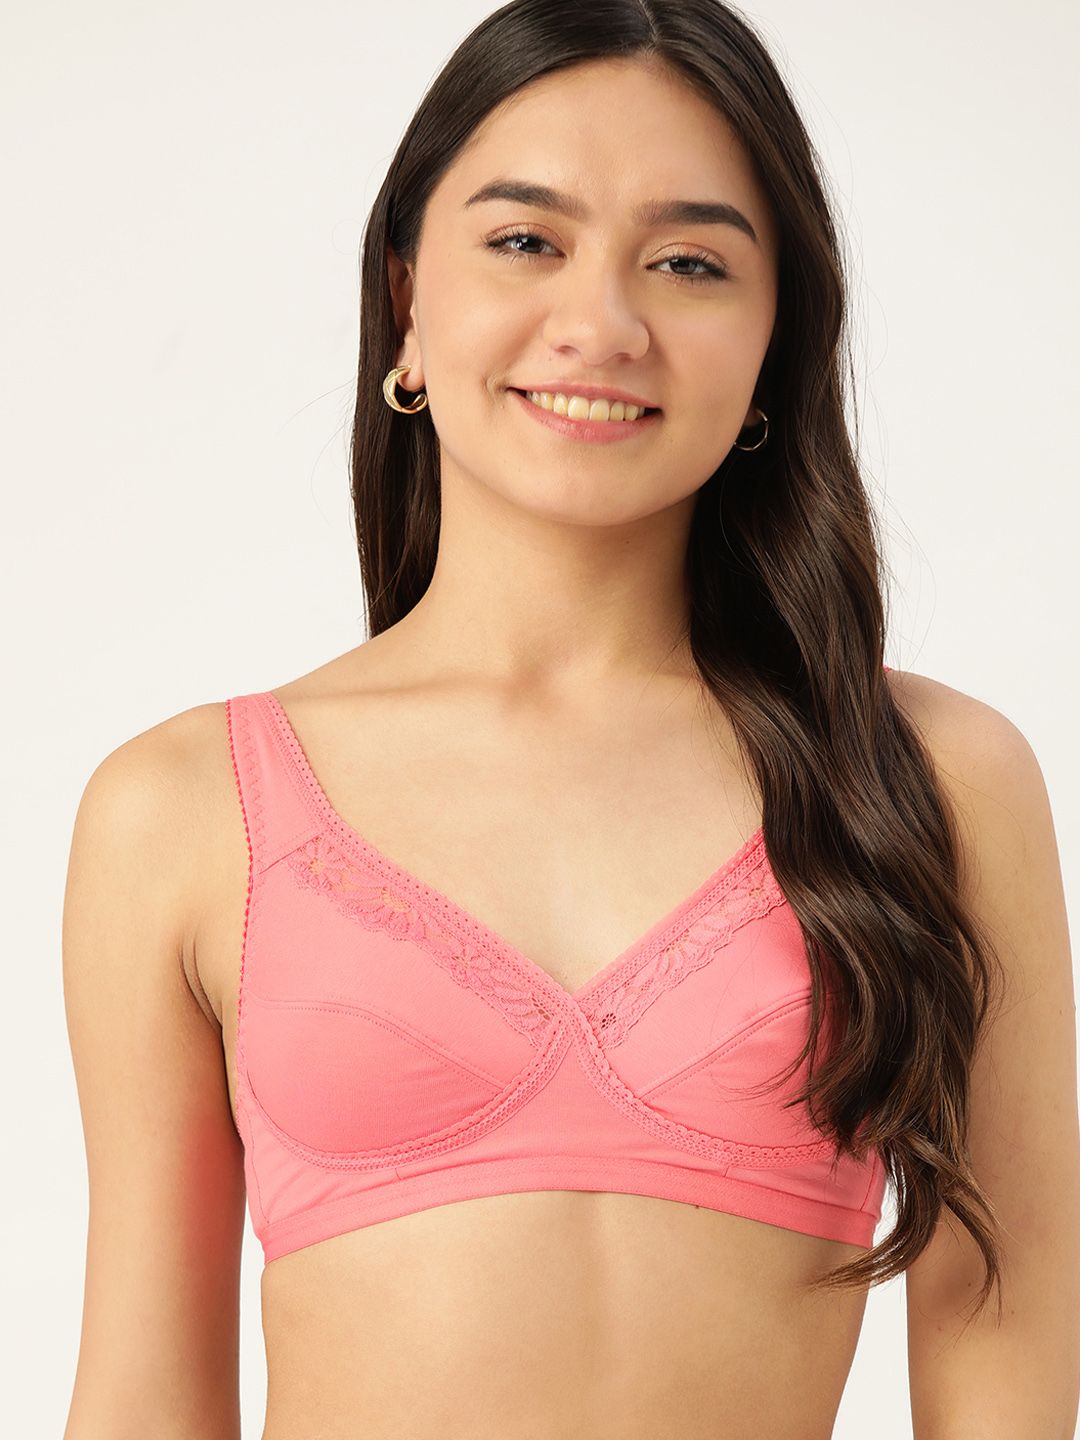 DressBerry Bra upto 80% Off starting @164 - THE DEAL APP  Get Best Deals,  Discounts, Offers, Coupons for Shopping in India